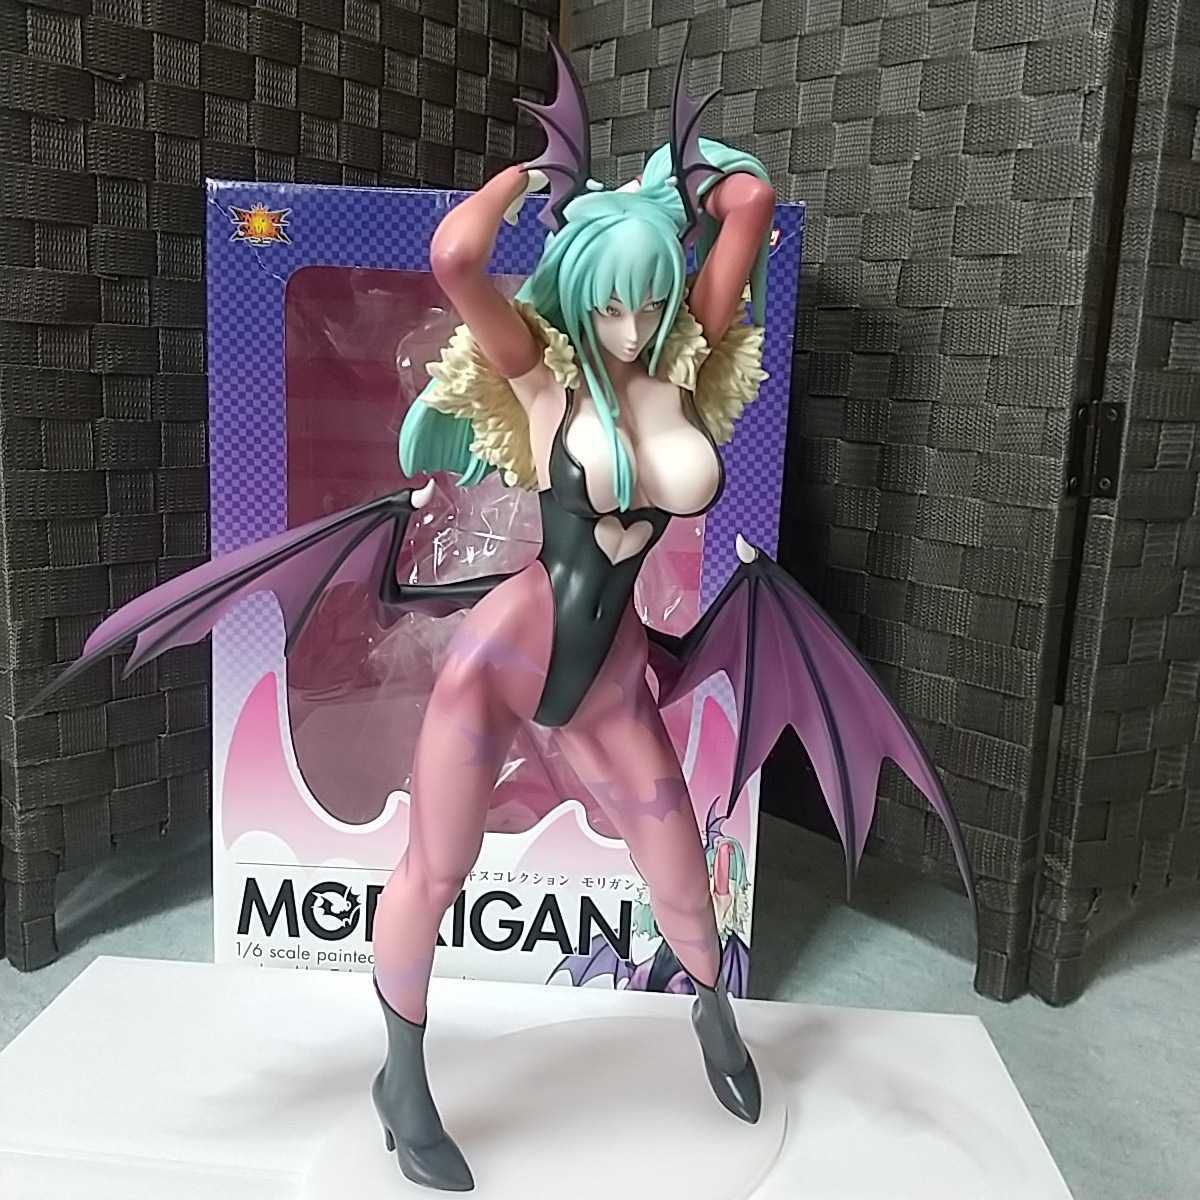 Hatsune Miku's new Gesen figure is too erotic with the highest quality ever 66